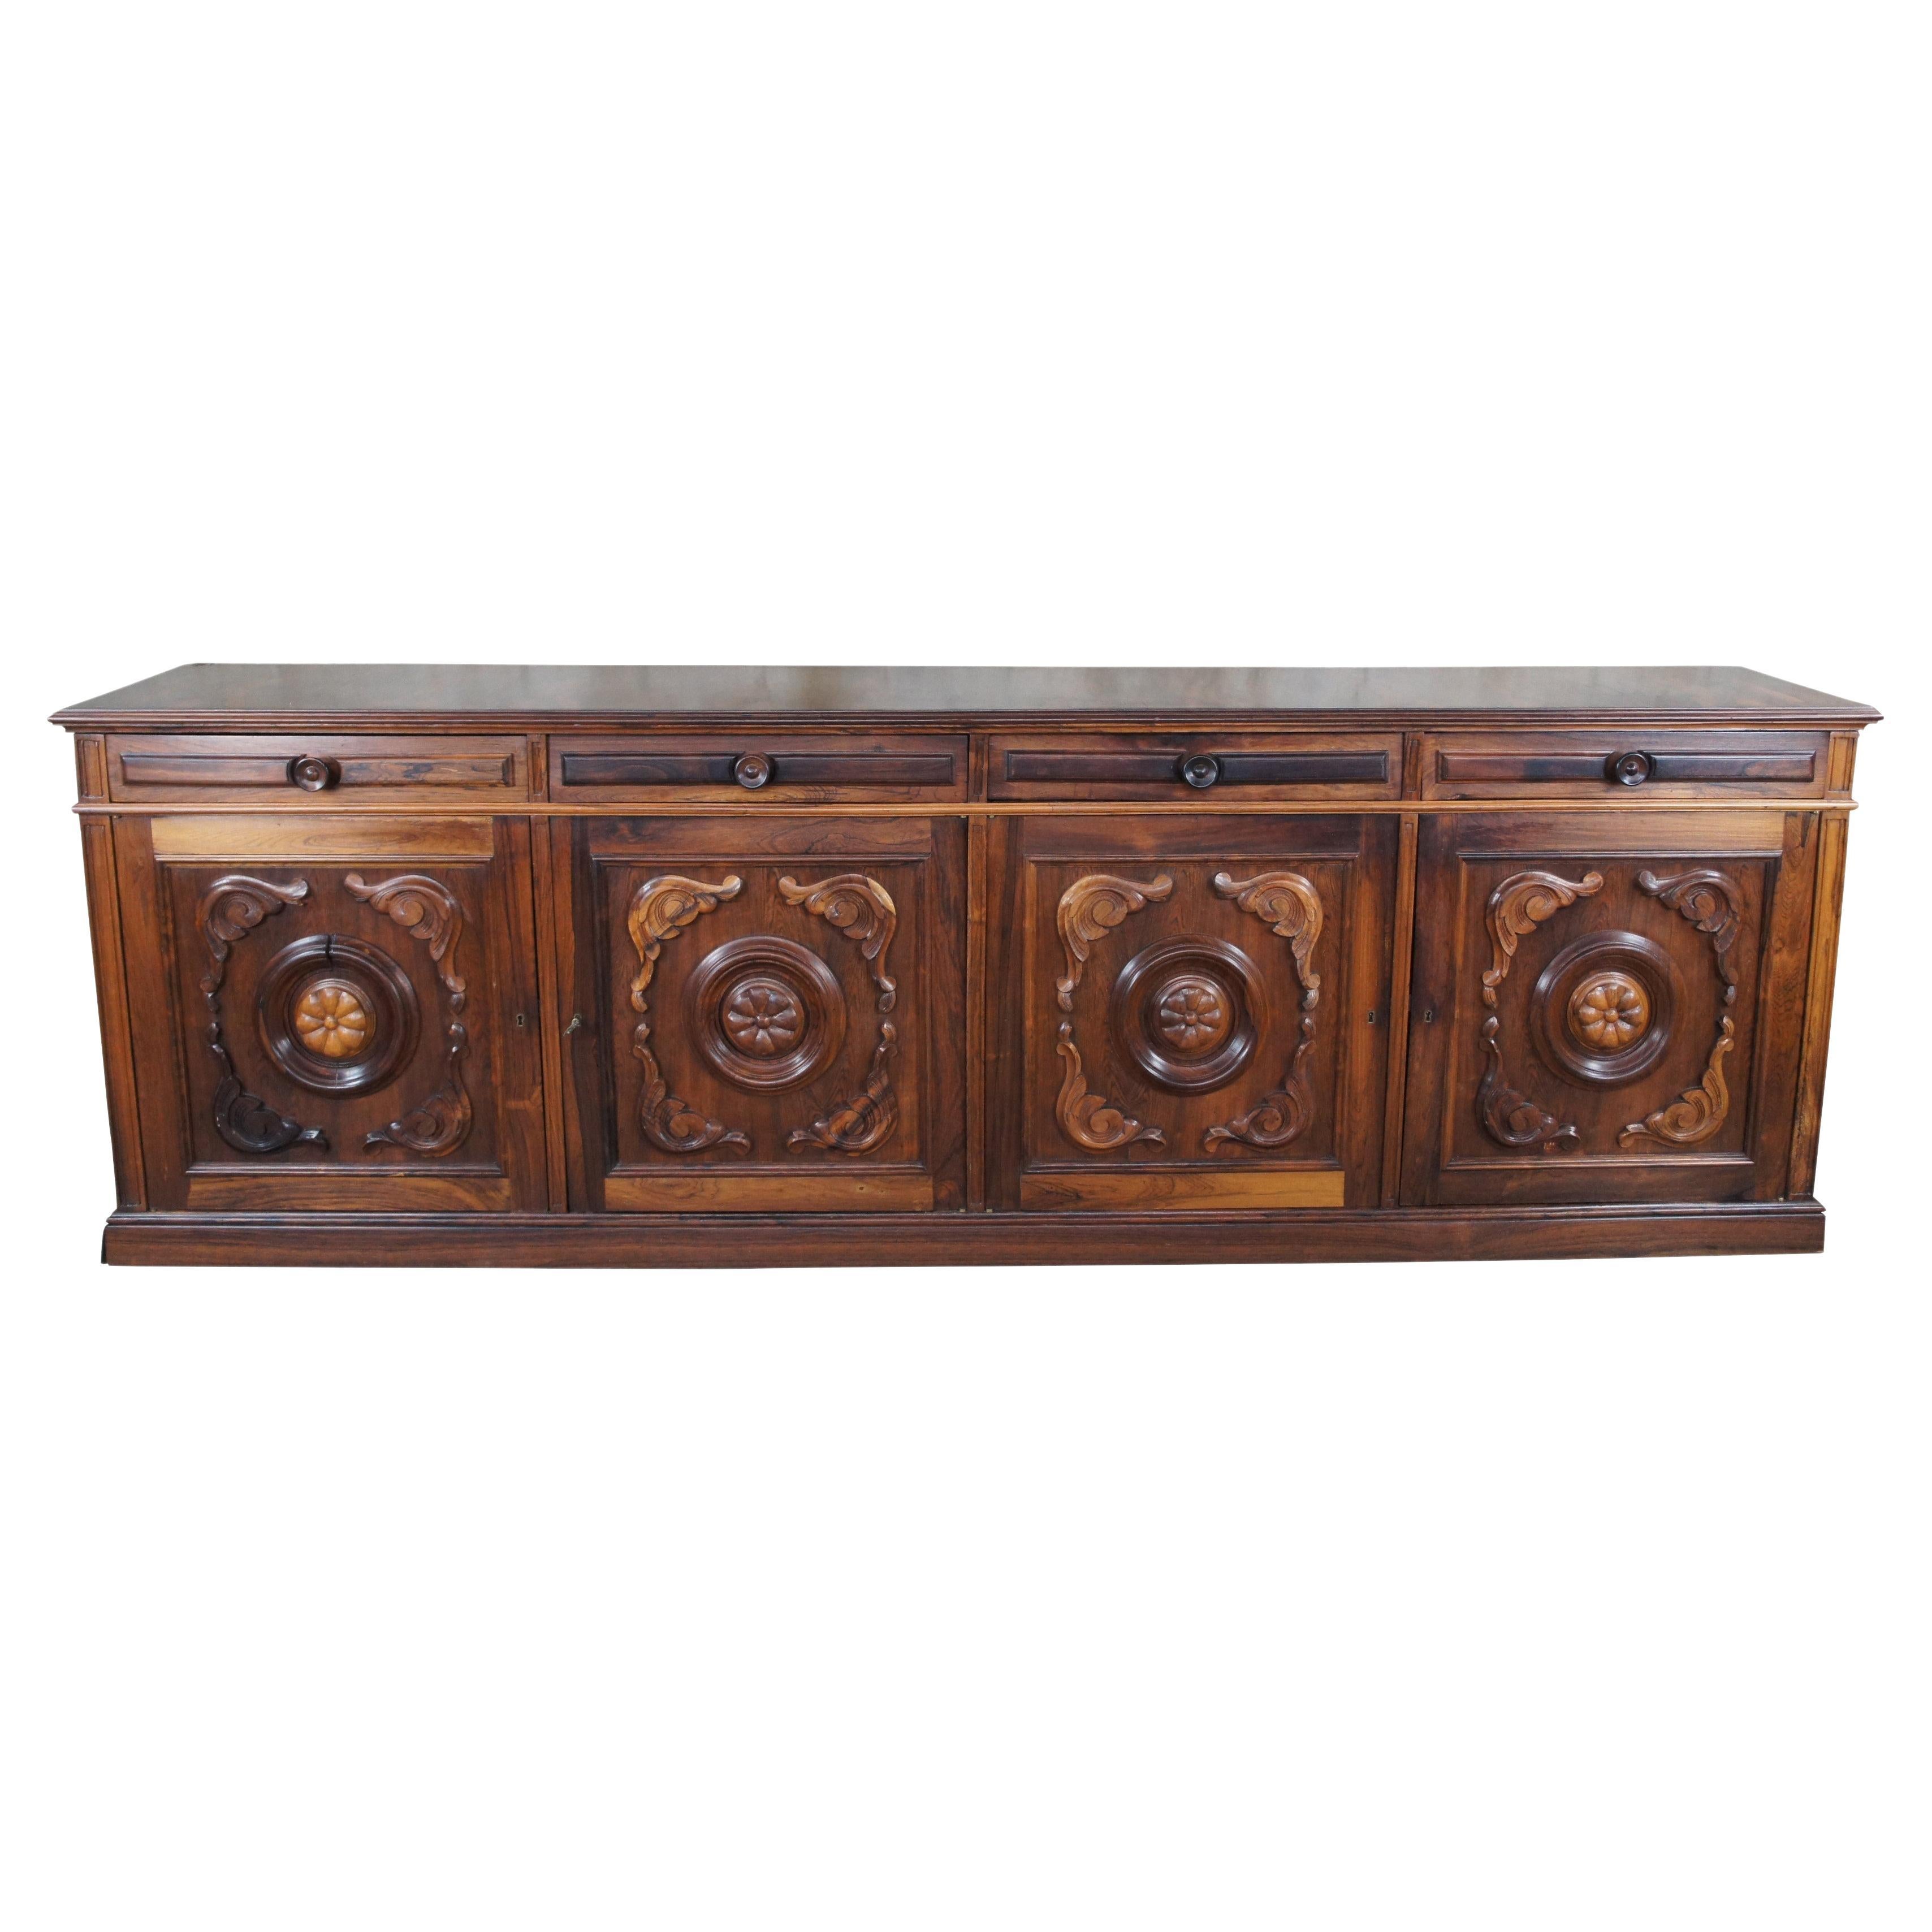 Midcentury Brazilian Rosewood French Provincial Sideboard Console Credenza For Sale